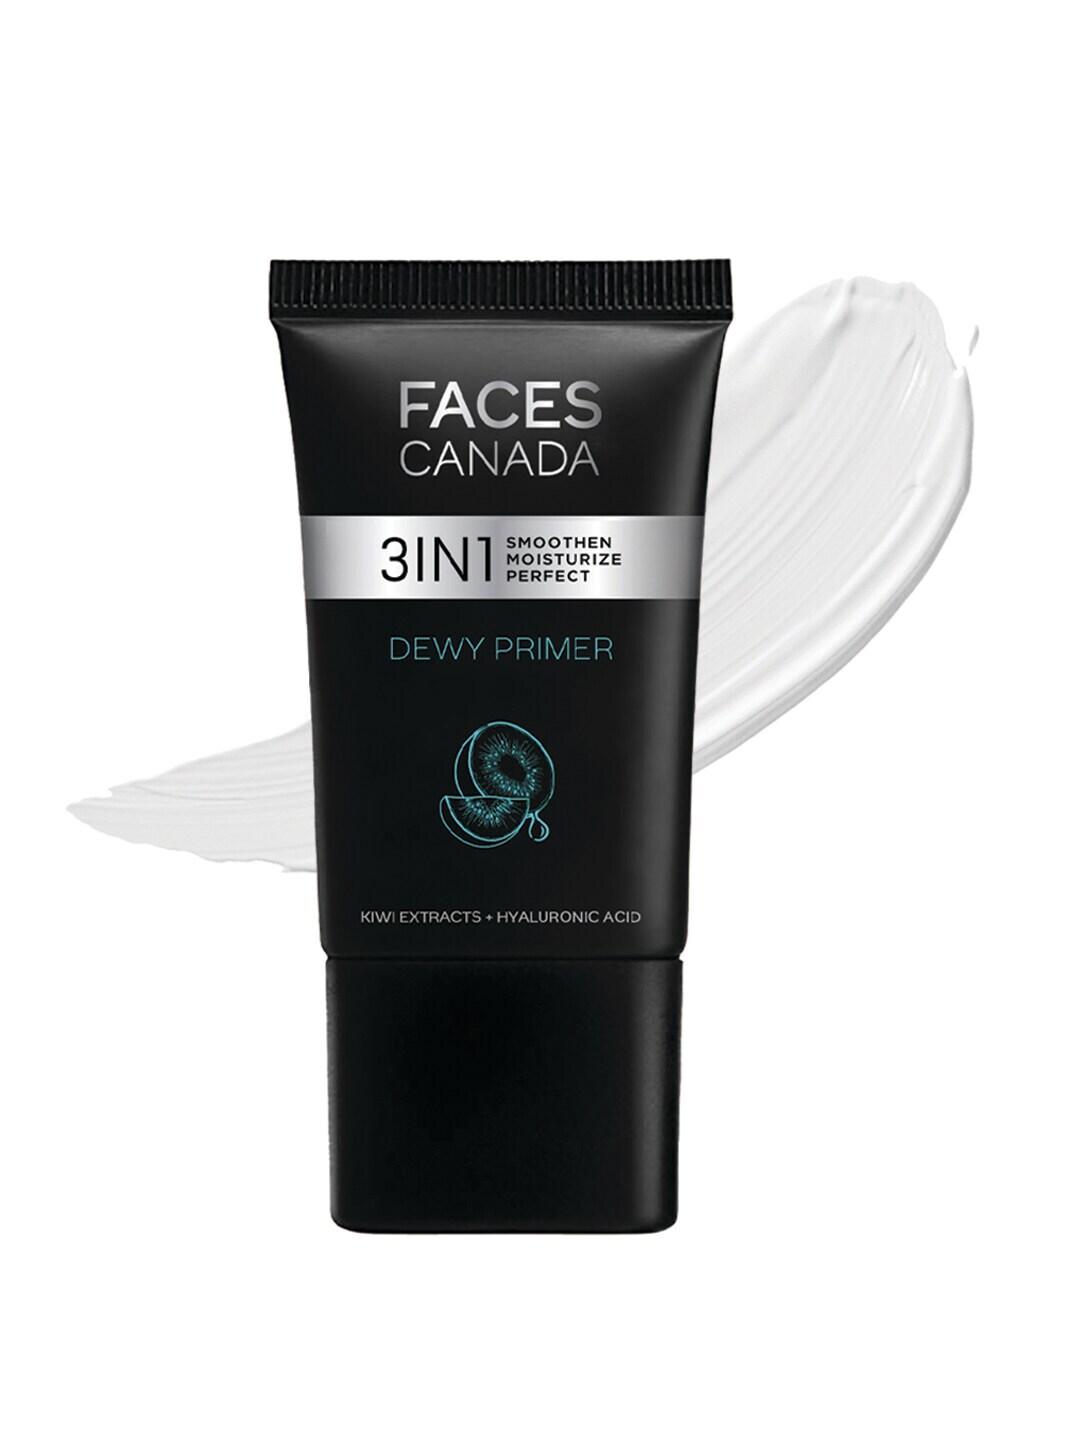 faces-canada-3-in-1-smoothen-moisture-perfect-dewy-primer-with-hyaluronic-acid---30gm